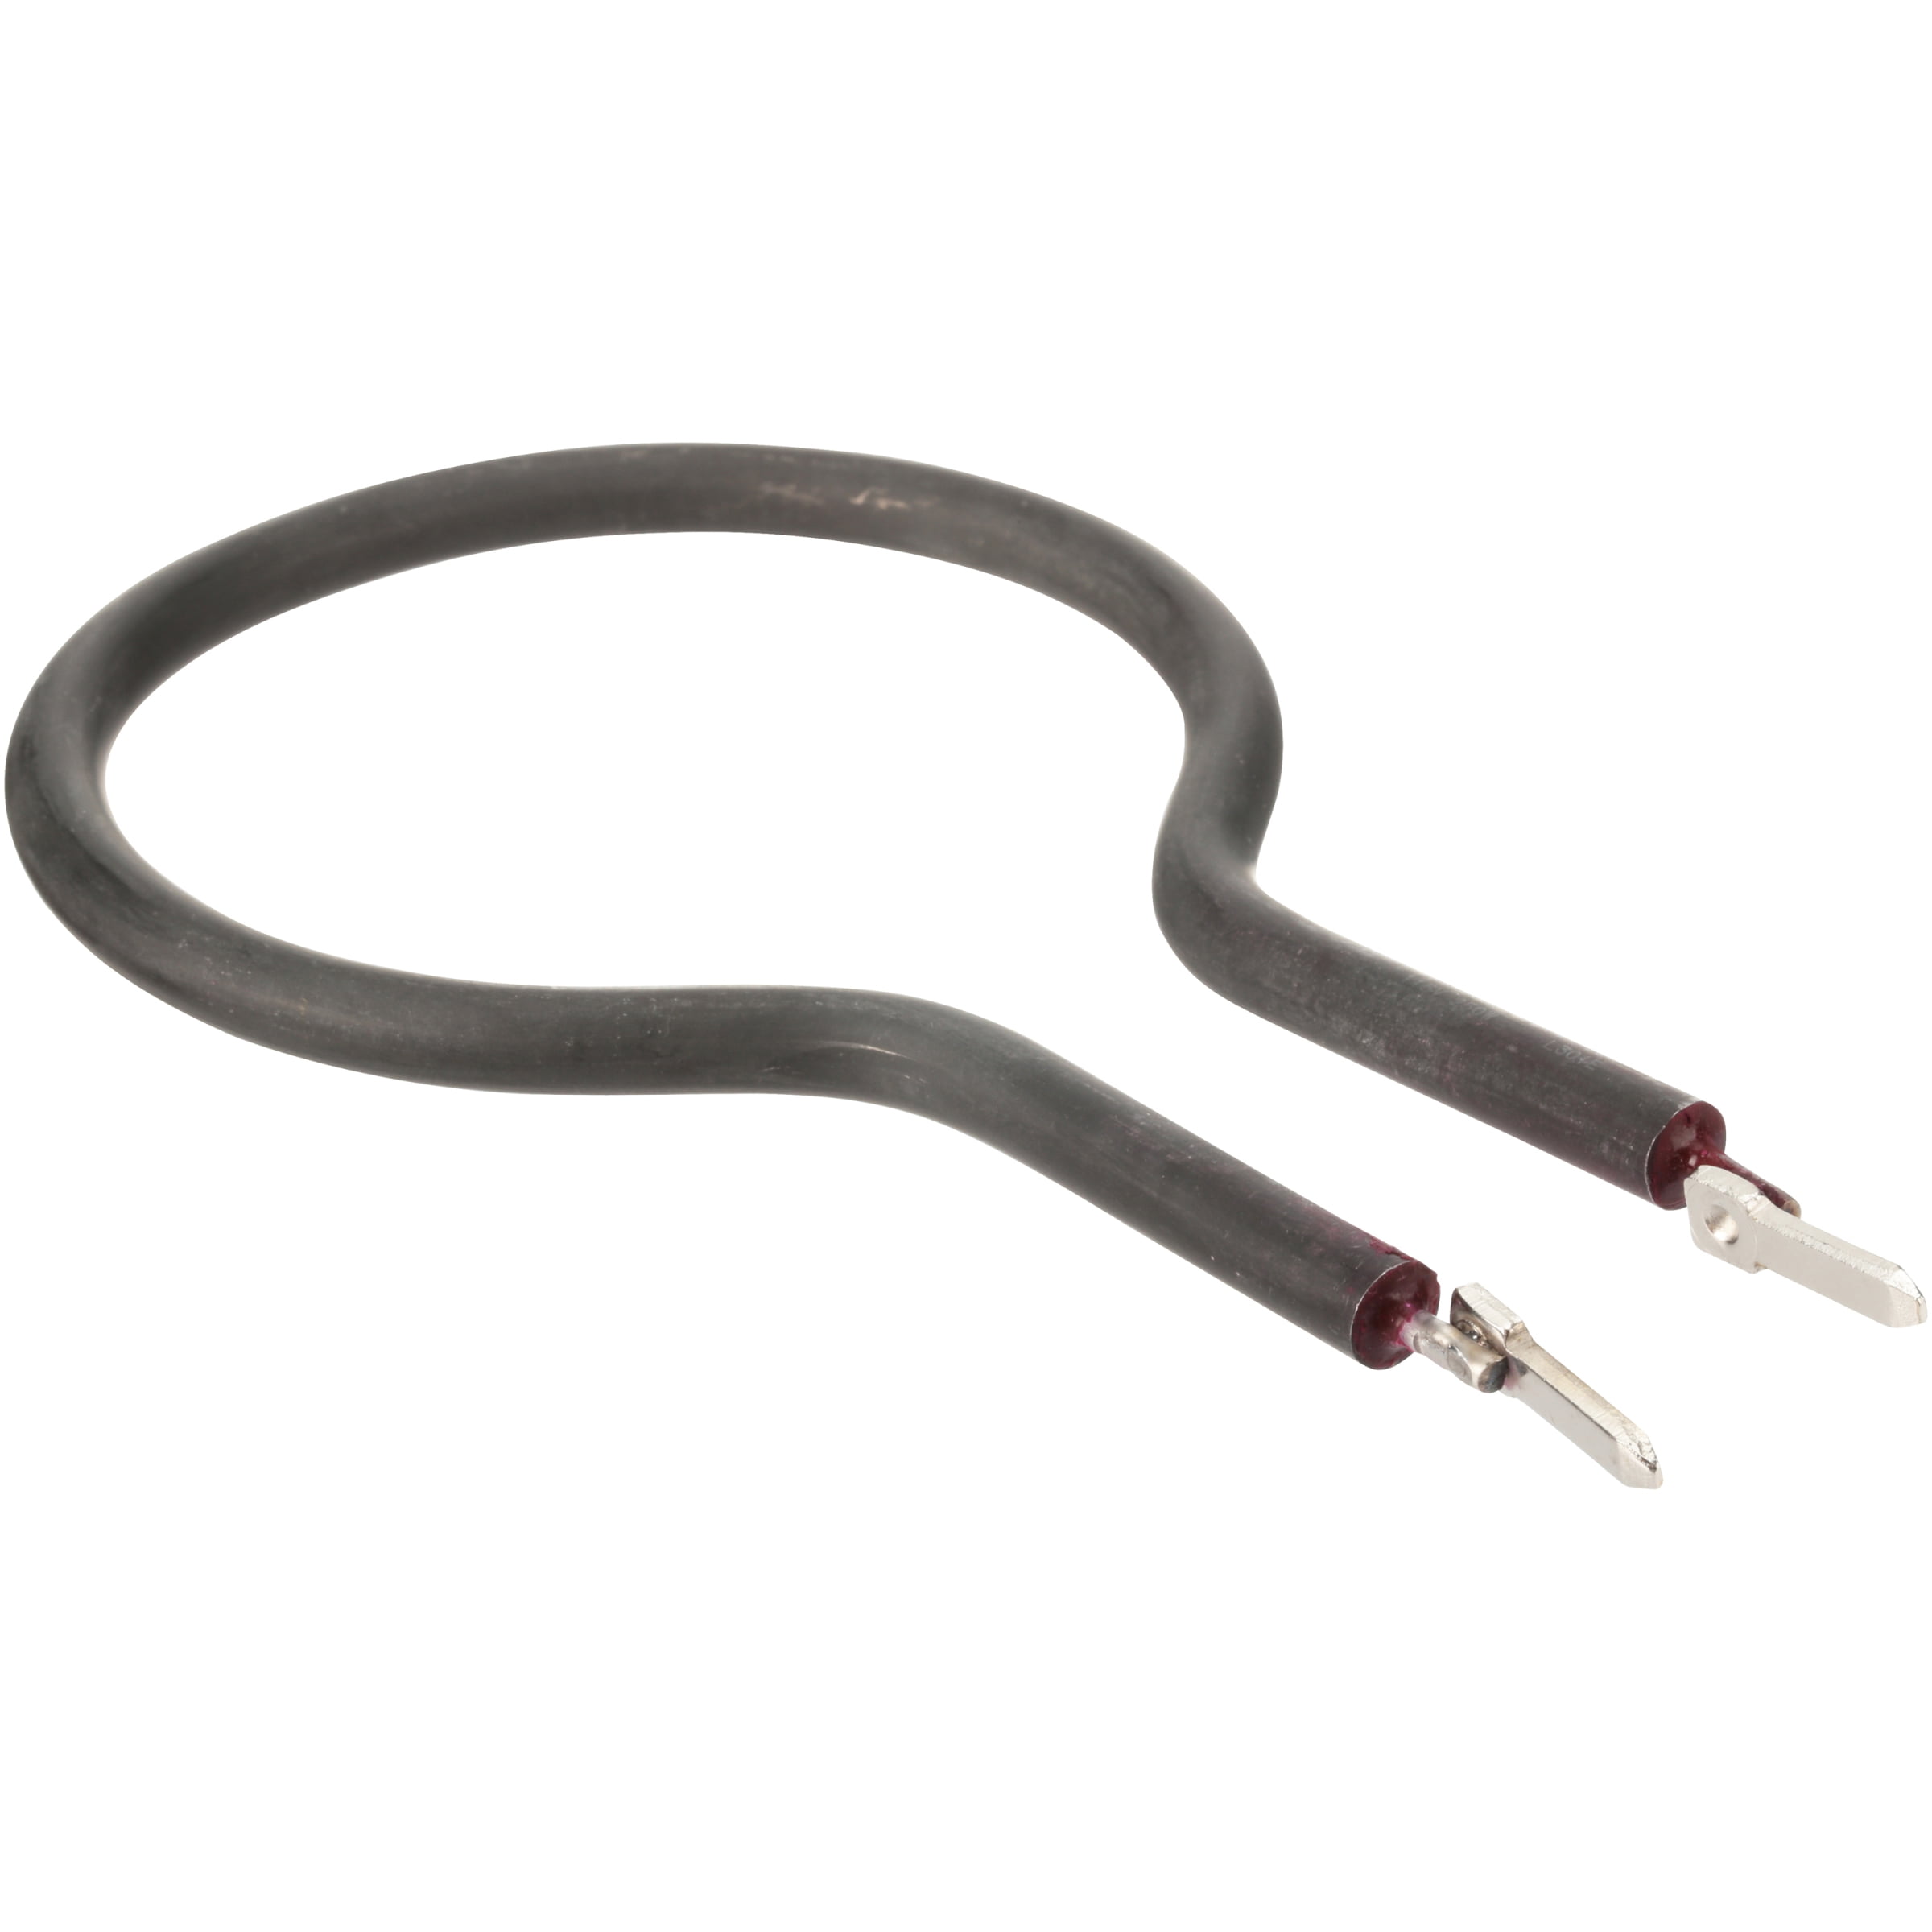 Replacement Power Cord for Smokehouse LJ Little Chief Smoker 9820-000-000 